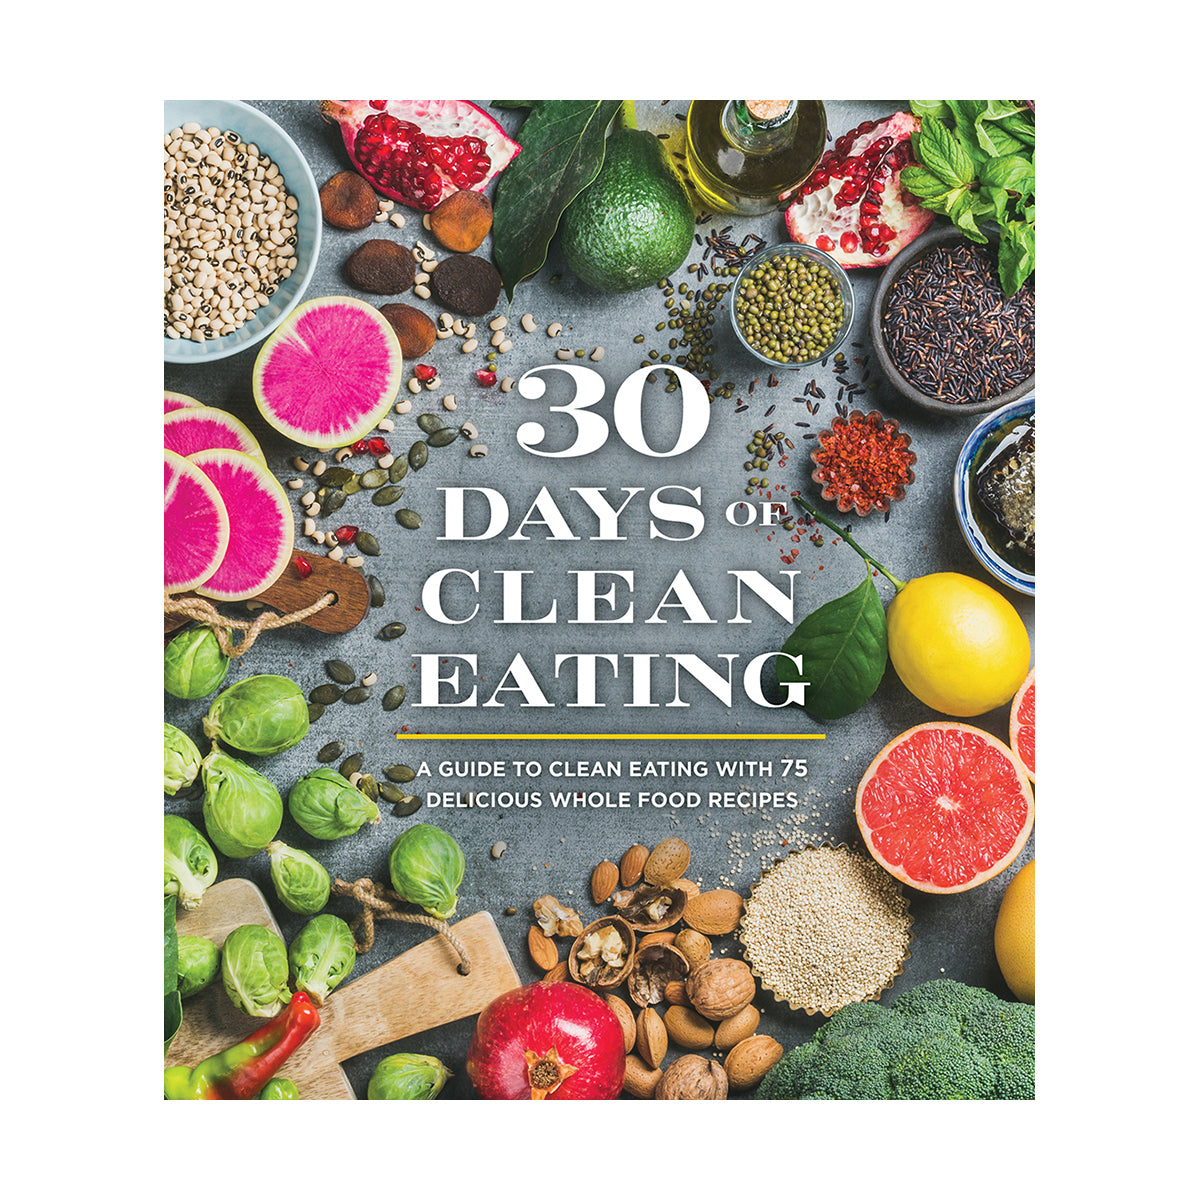 30 Days of Clean Eating A Guide to Clean Eating with 75 Delicious Whole Food Recipes